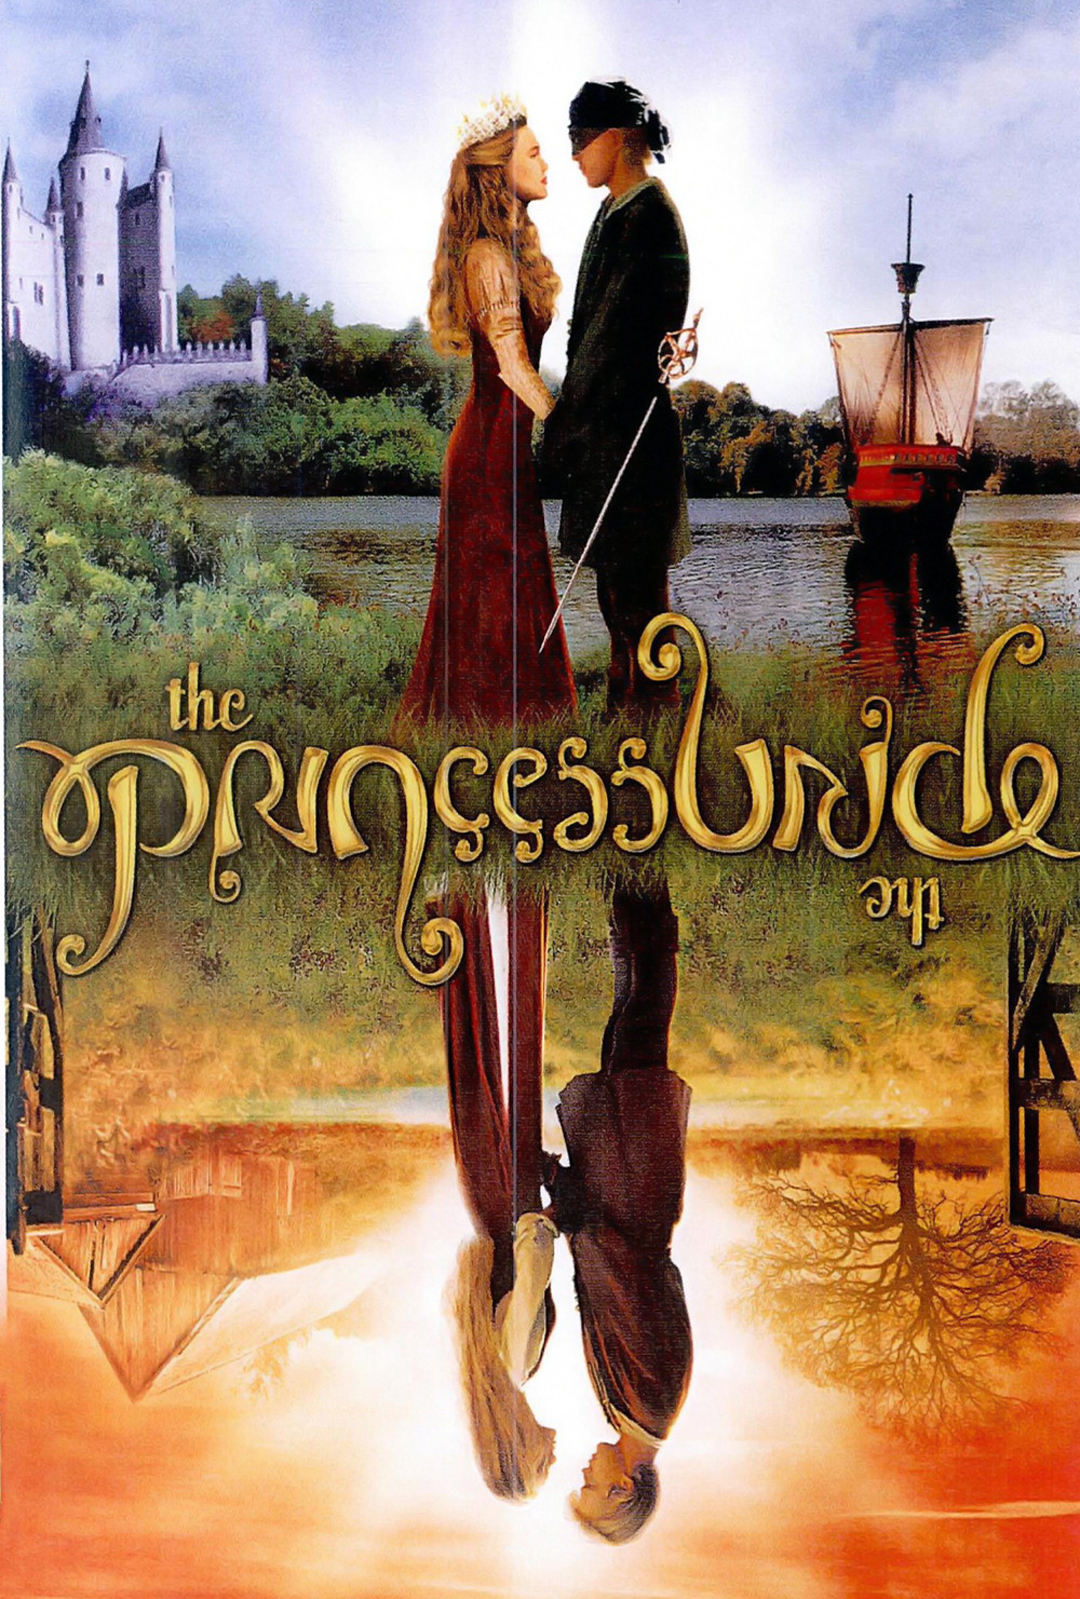 Disney to Make The Princess Bride for the Stage